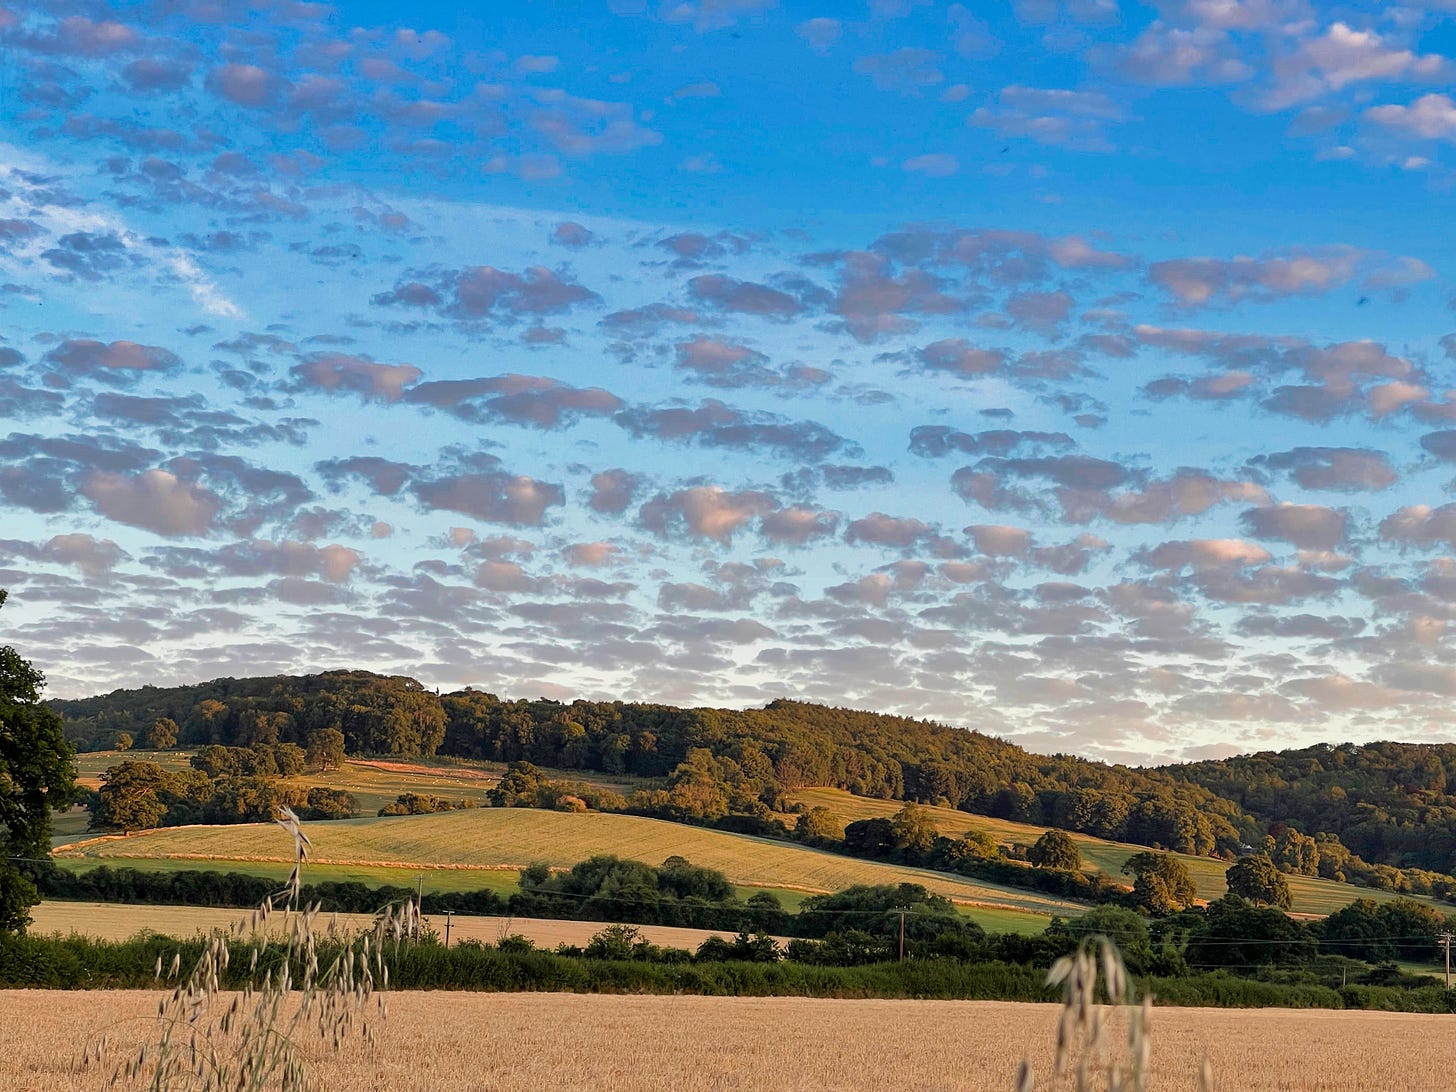 The Cotswolds hills in England against a blue sky with white clouds dotting the sunset.